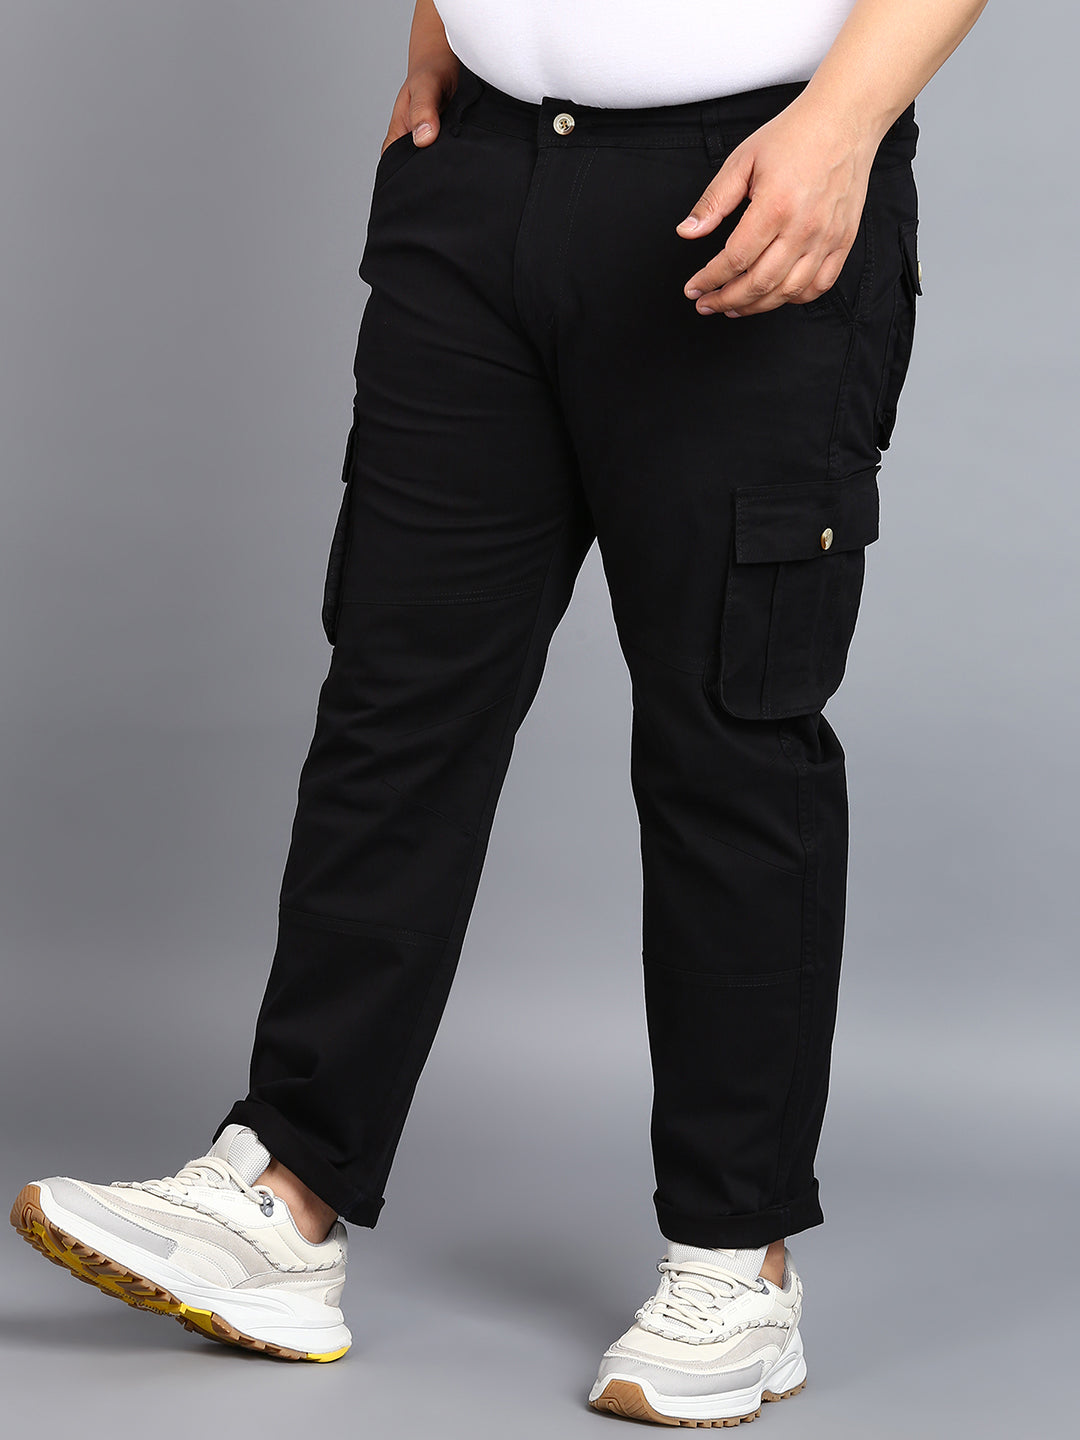 Plus Men's Black Regular Fit Solid Cargo Chino Pant with 6 Pockets